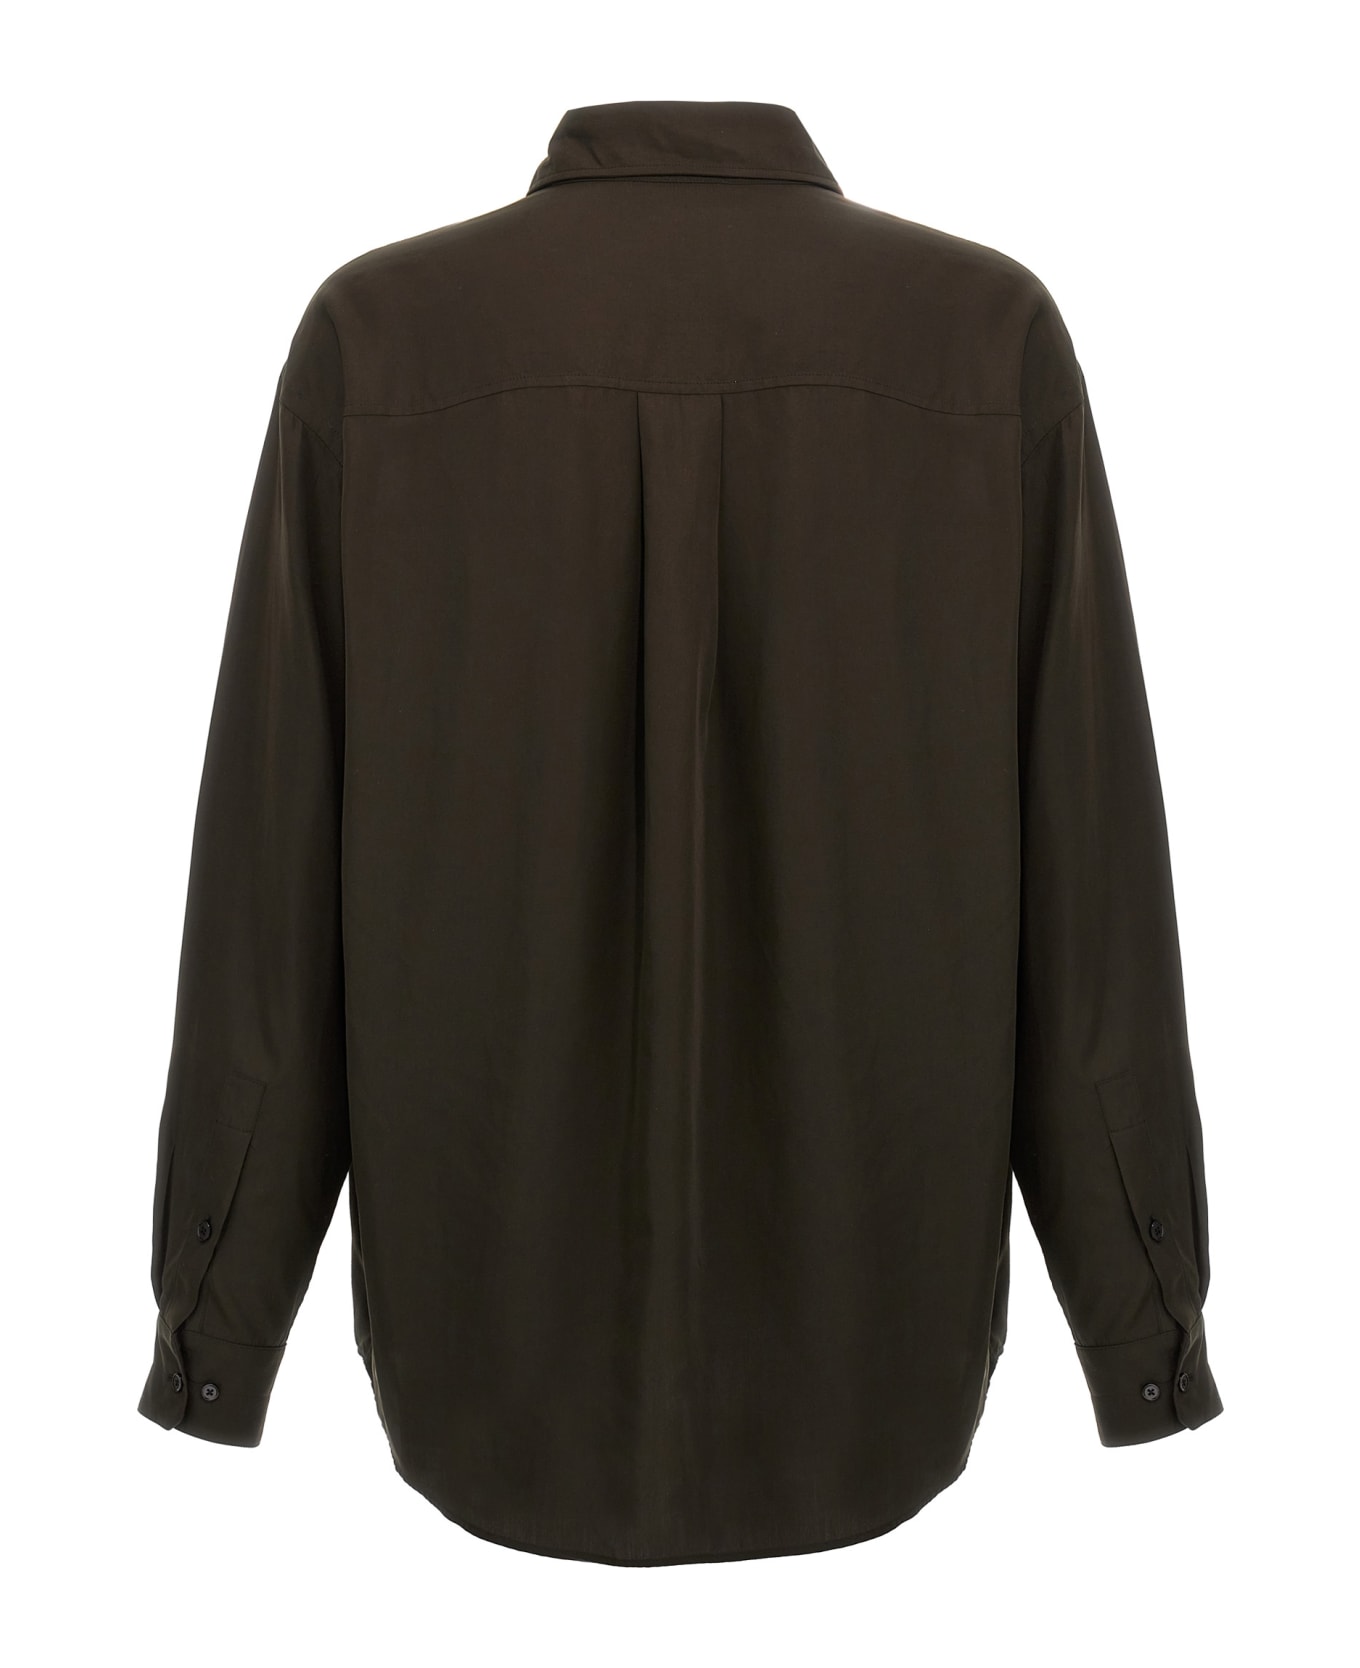 Lemaire 'double Pocket' Shirt - Brown